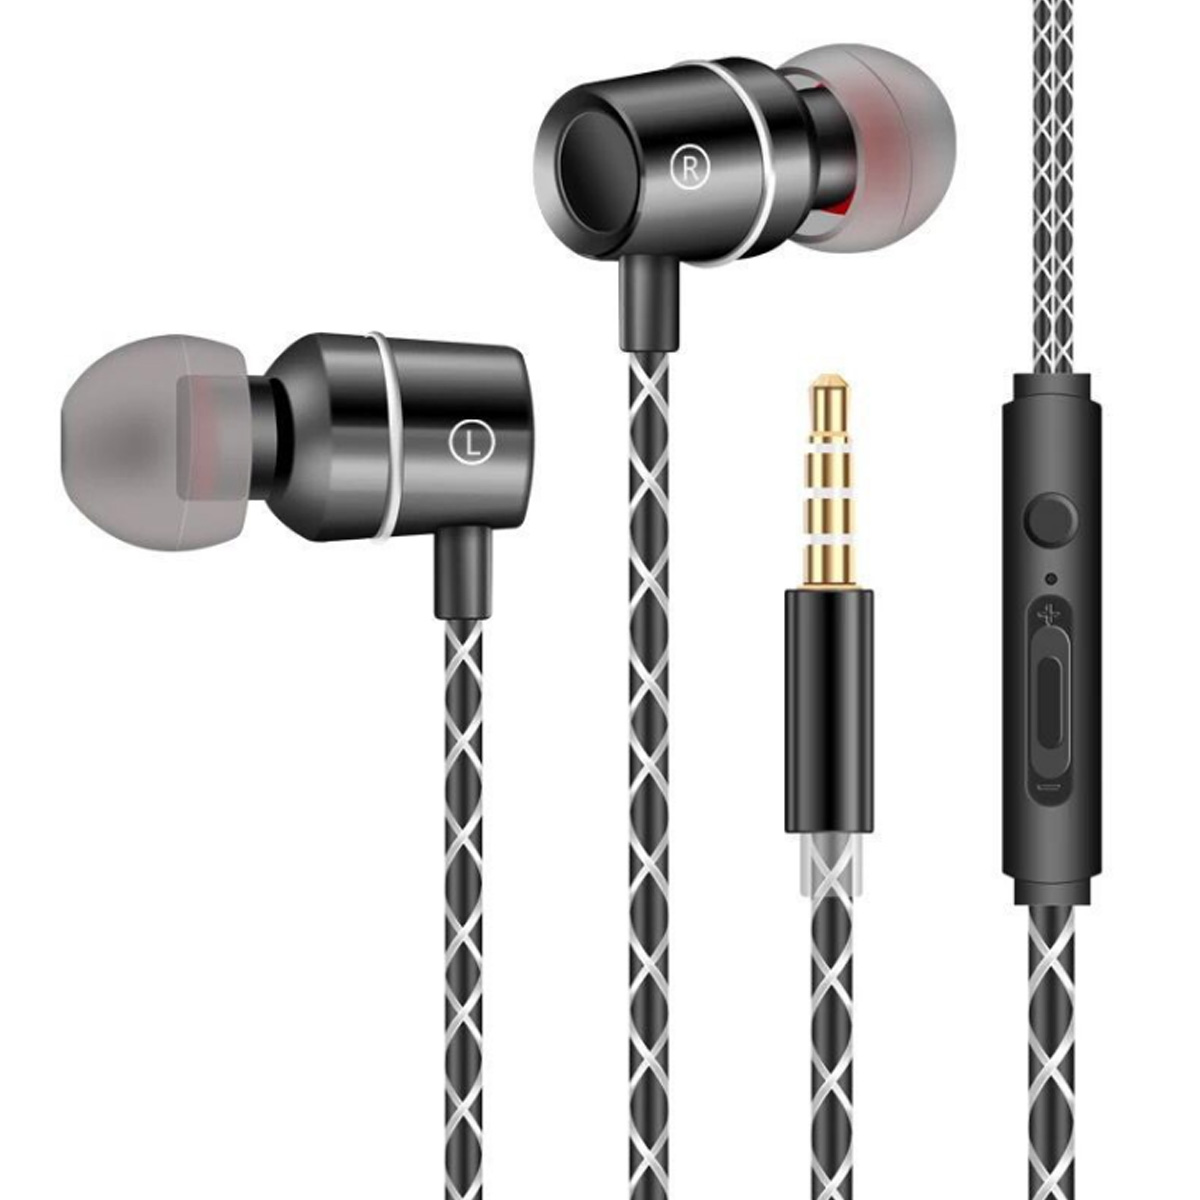 

AUGIENB 3.5mm Wired Control Earphone Bass Stereo Earbuds Headphone with Mic for iPhone Huawei